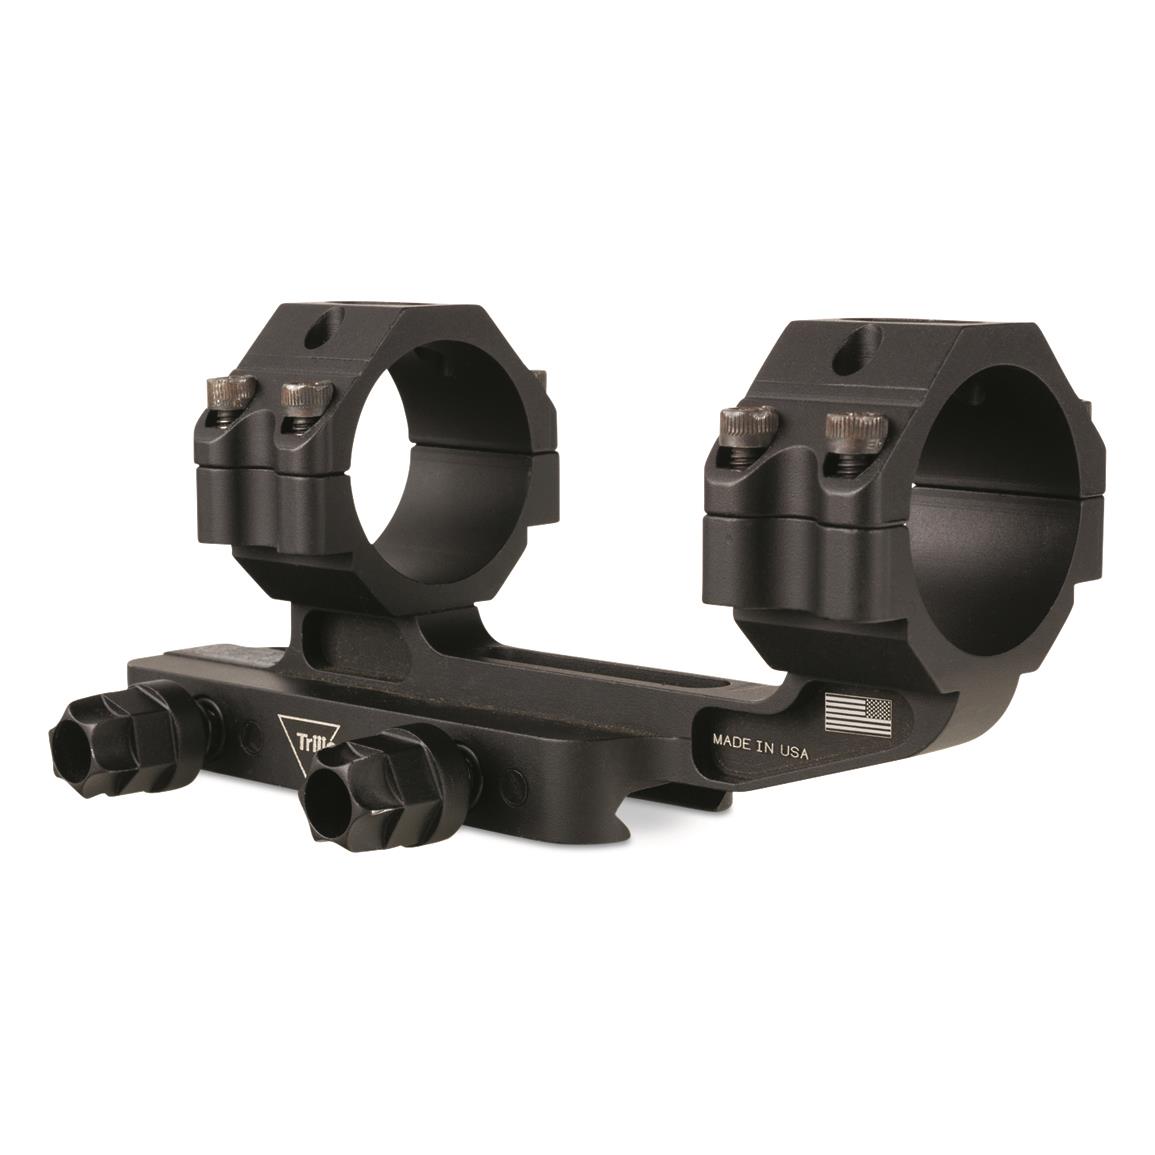 Trijicon Cantilever Mount with Trijicon Q-LOC Technology, 30mm Tube